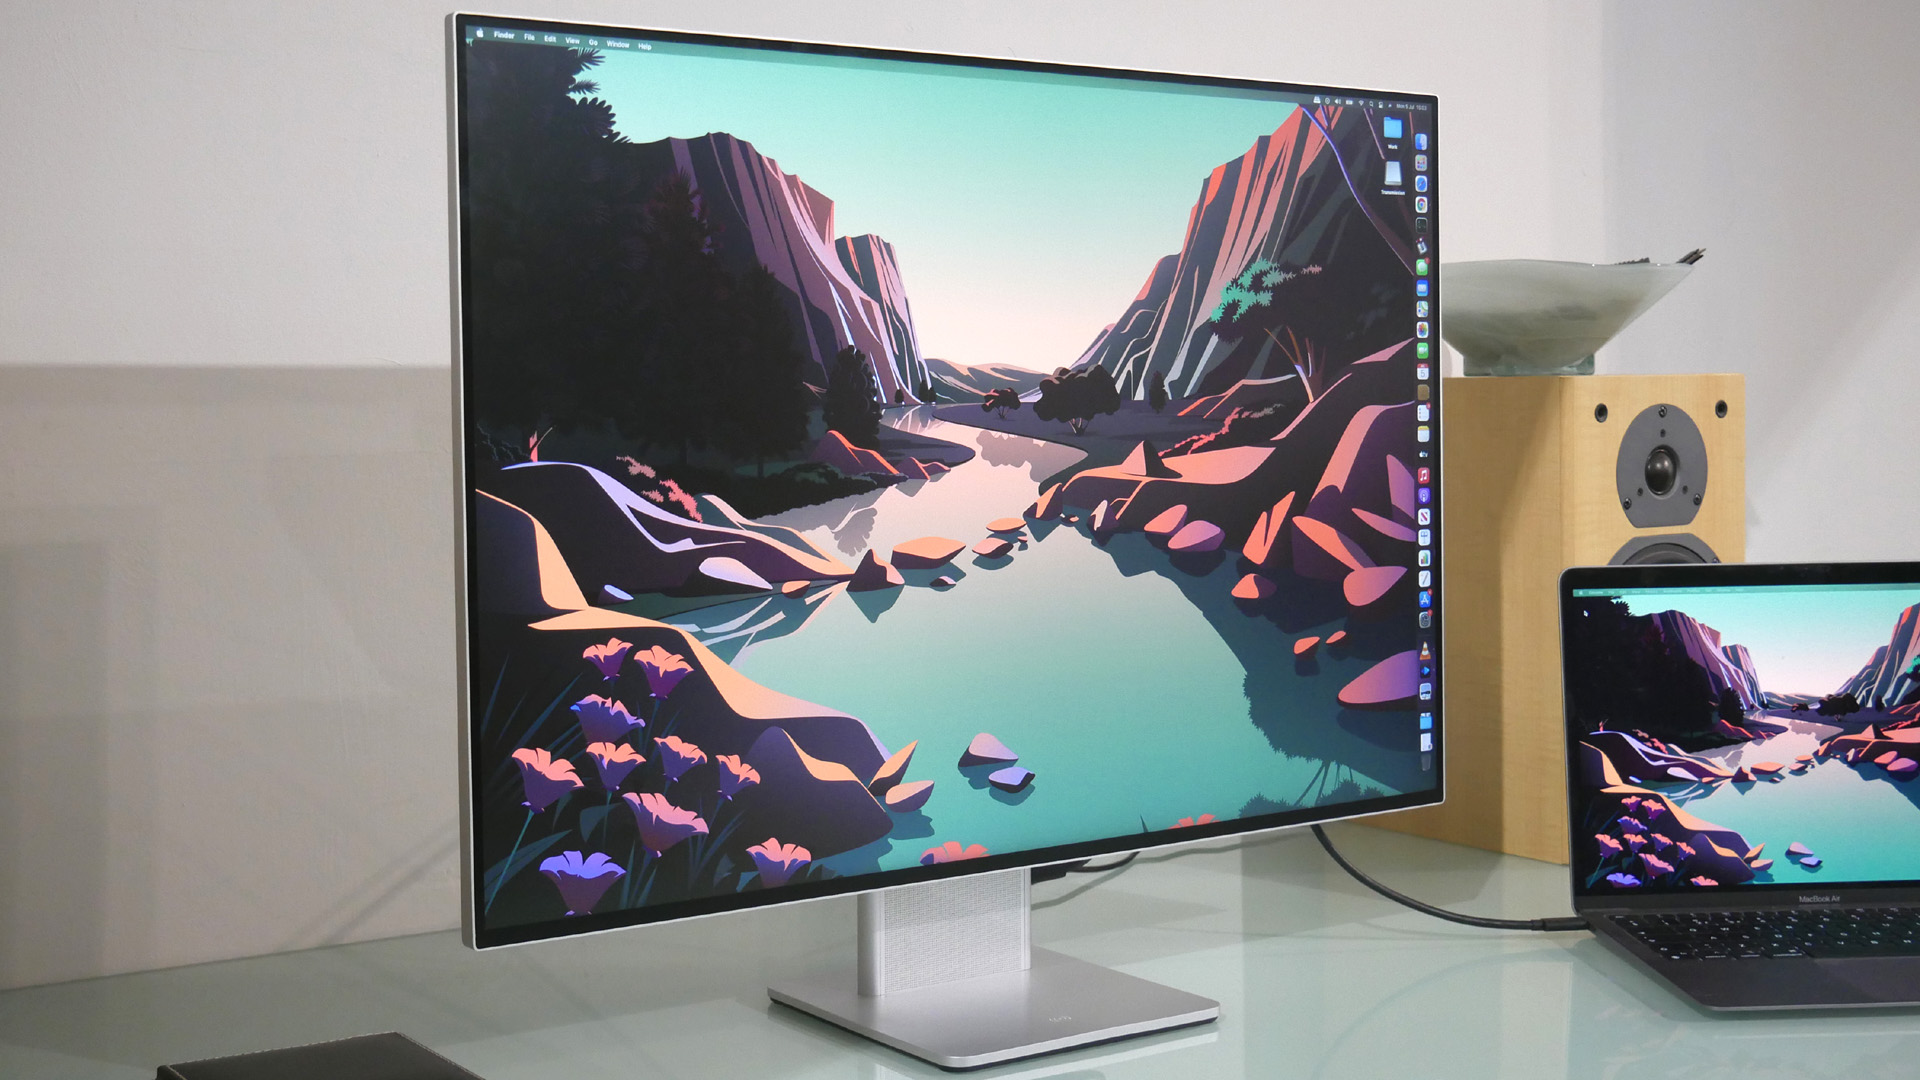 First Look: The Huawei MateView 4K-Plus 28-Inch Monitor Is a Stunner